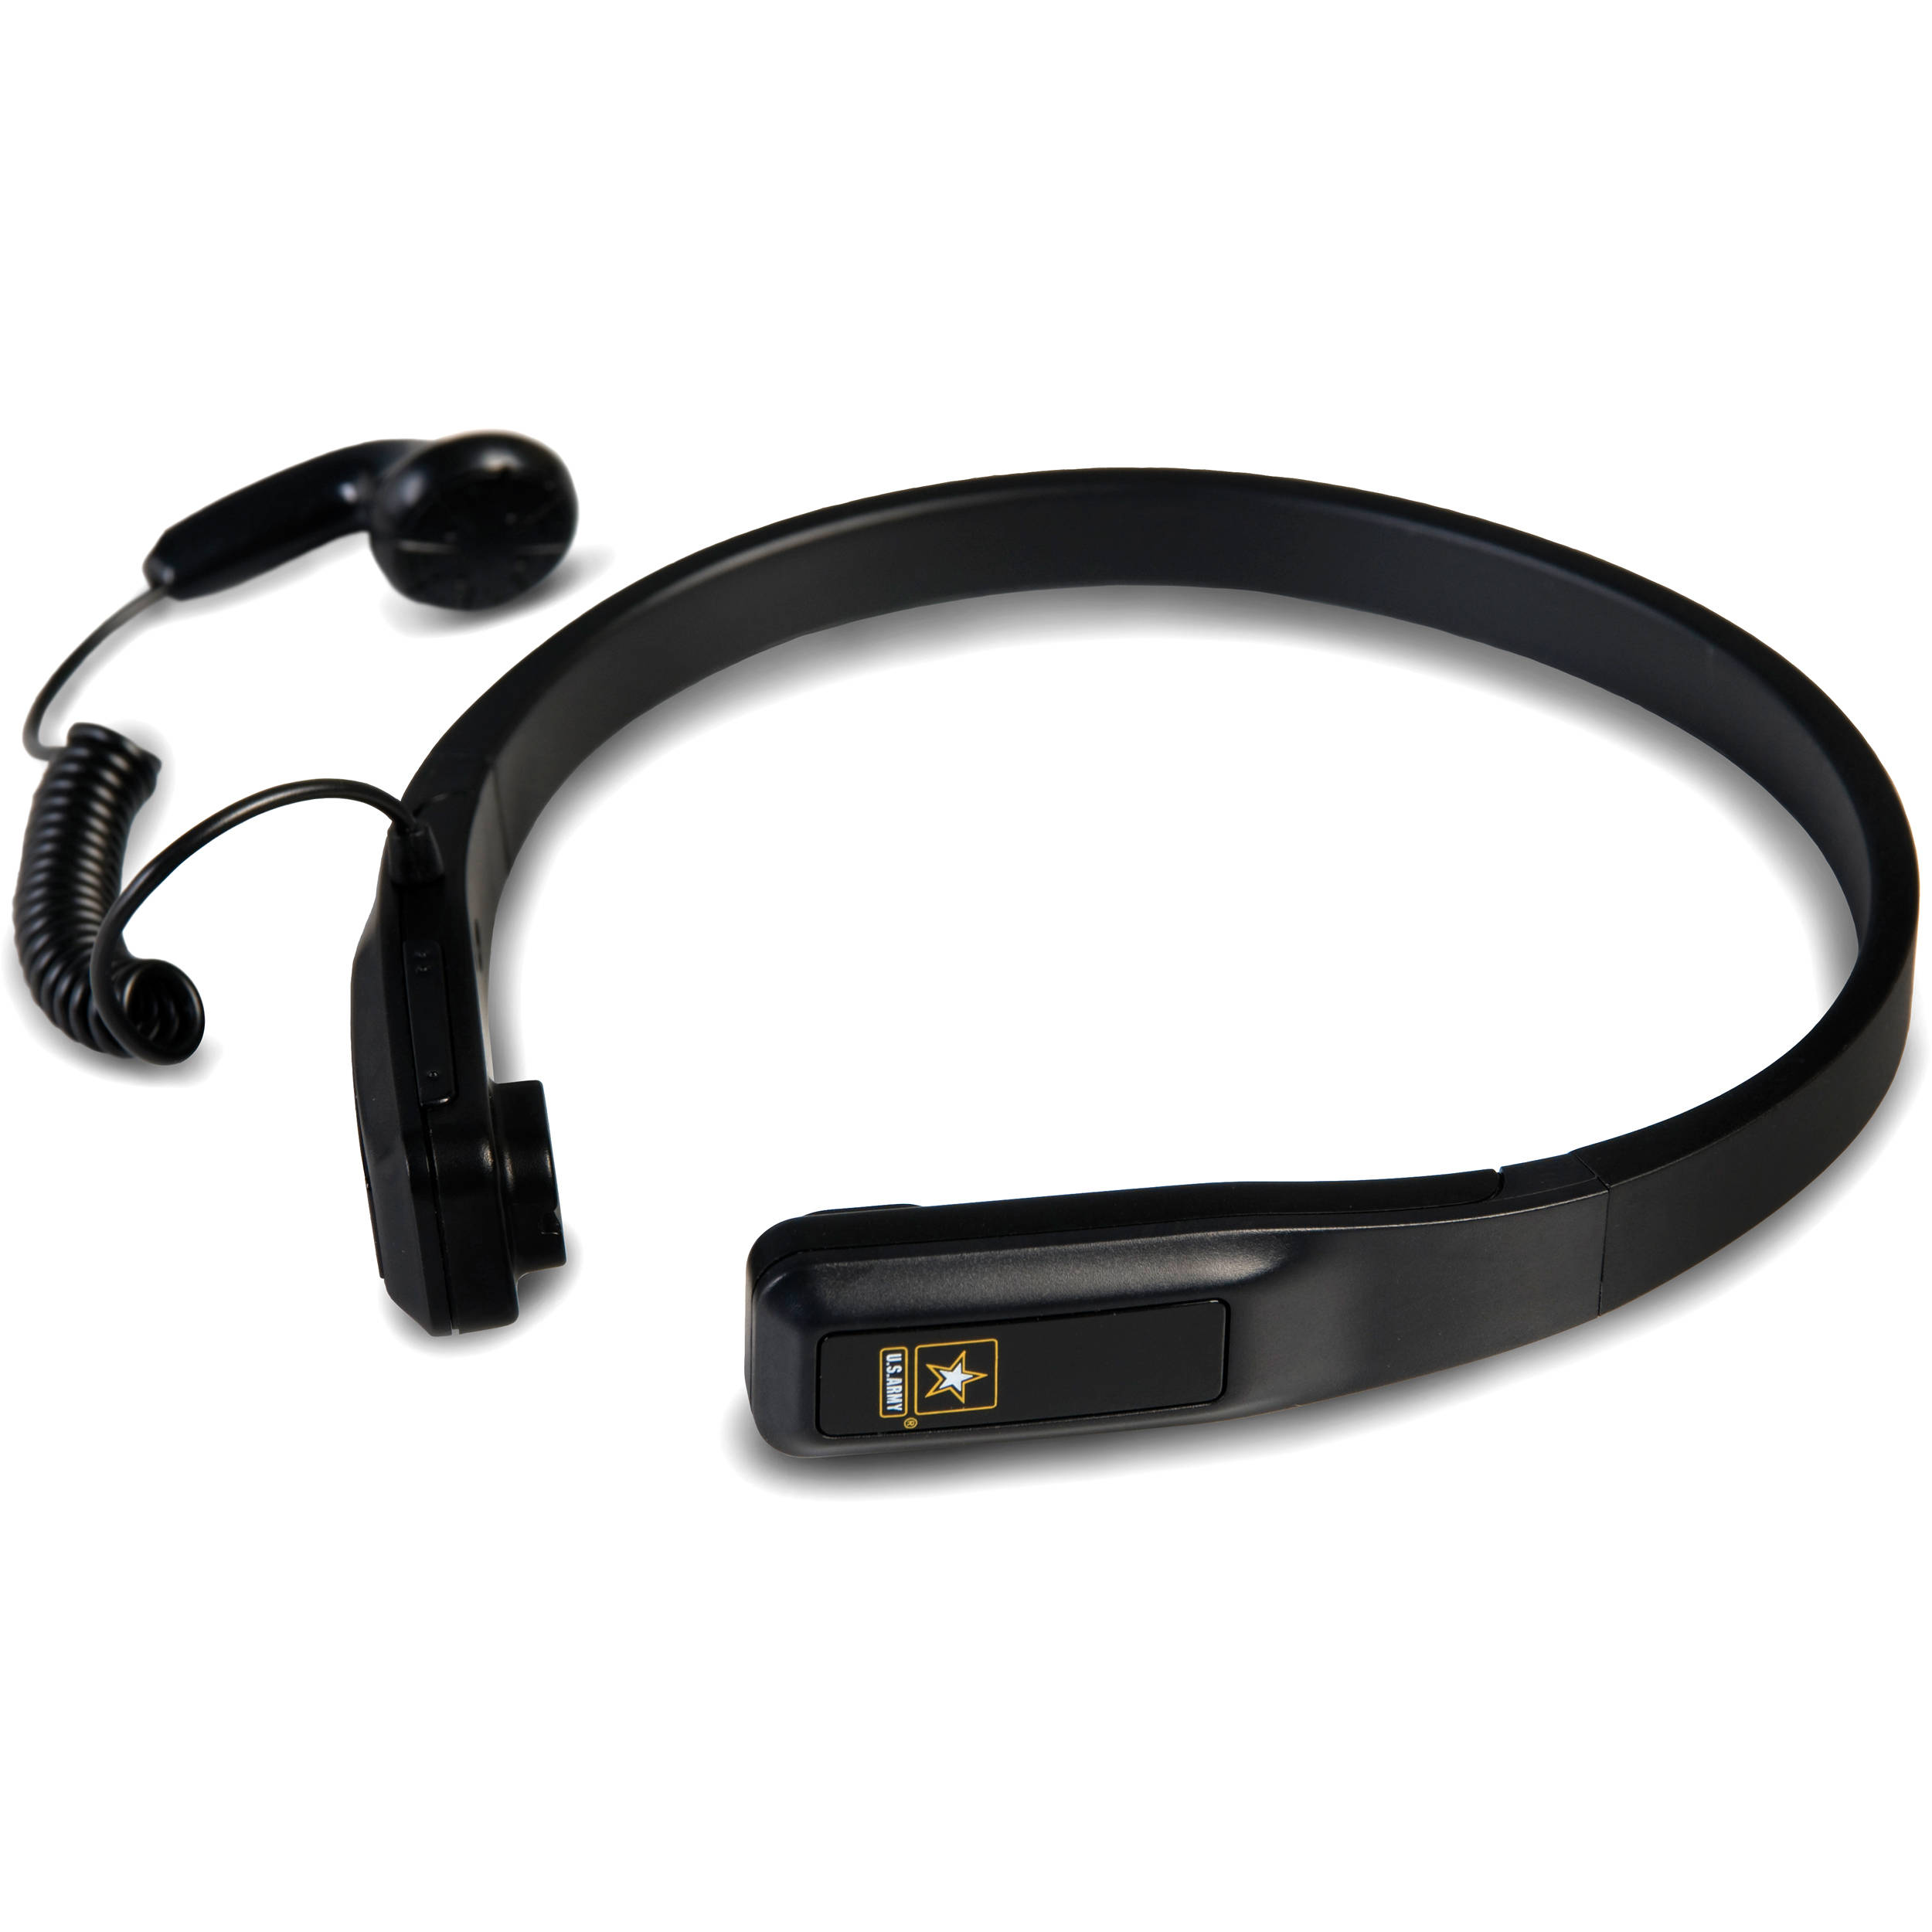 bluetooth microphone headset for computer